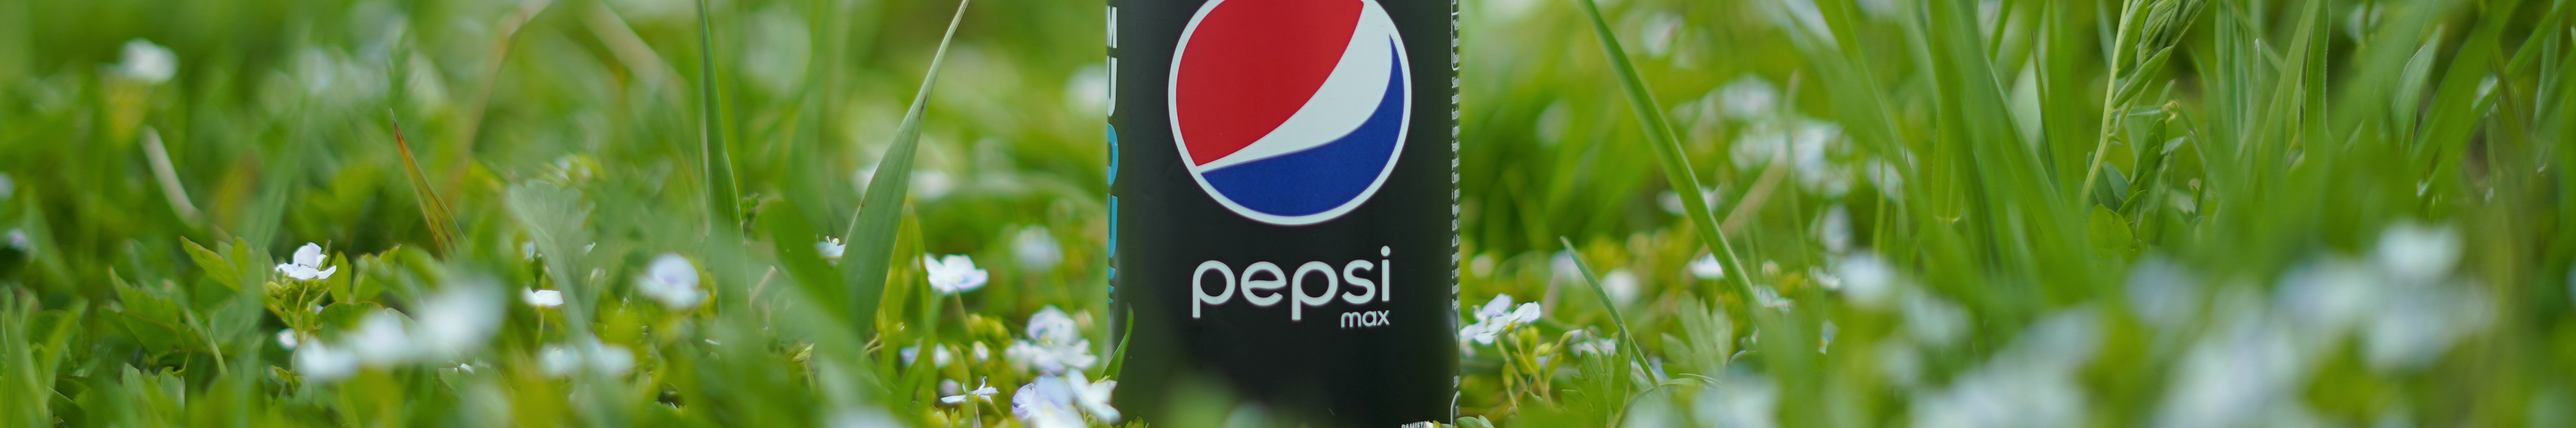 PepsiCo used around 8 million tonnes of packaging in 2021, 31% of which were plastics